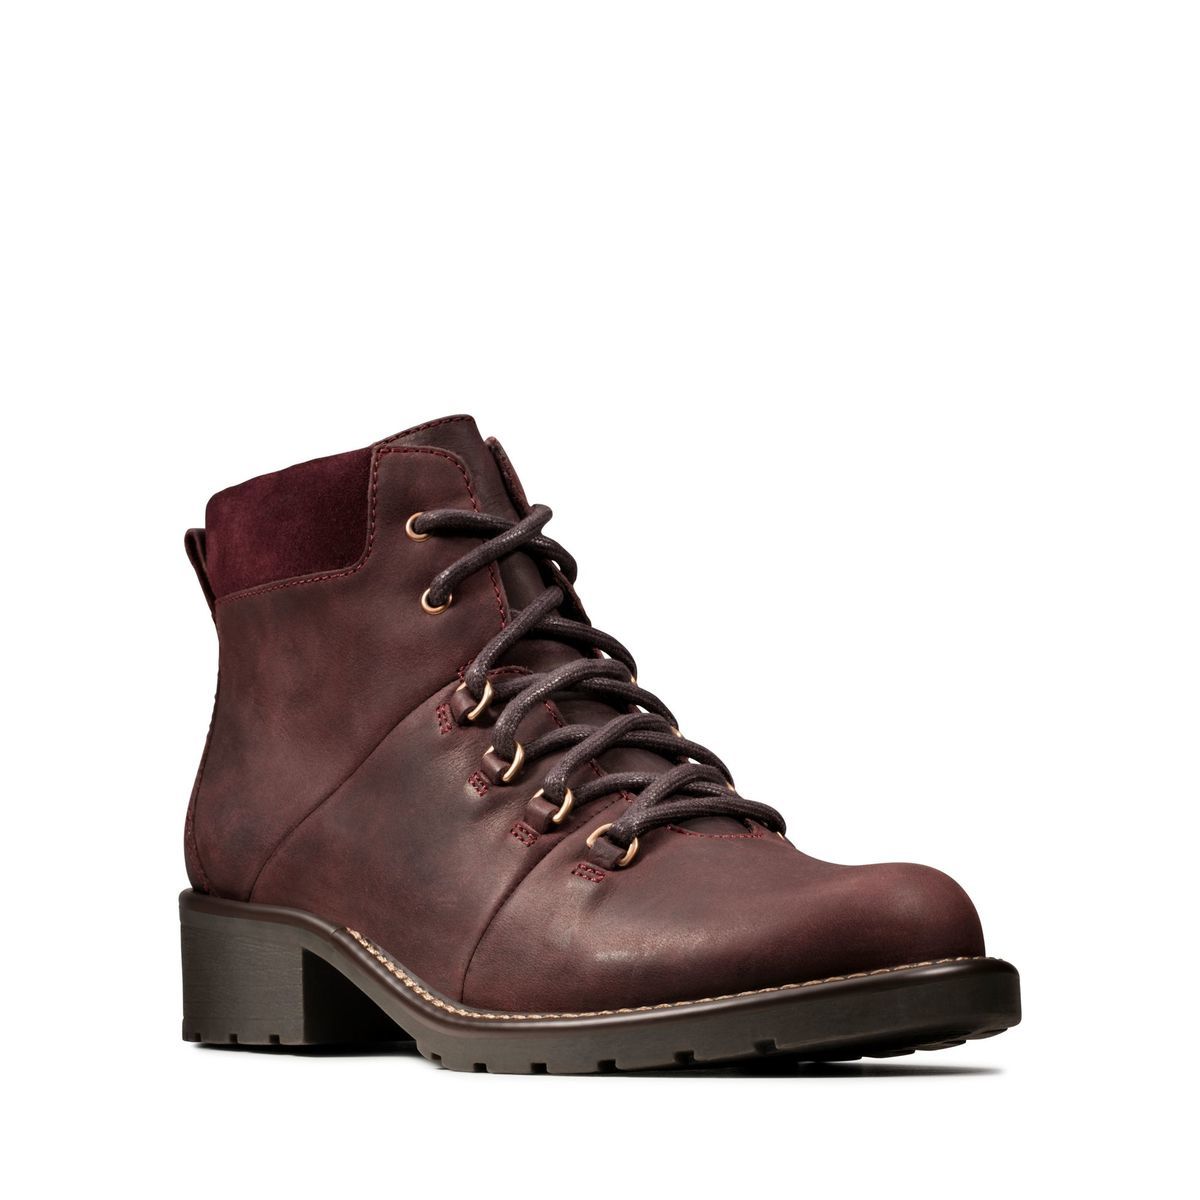 clarks burgundy ankle boots